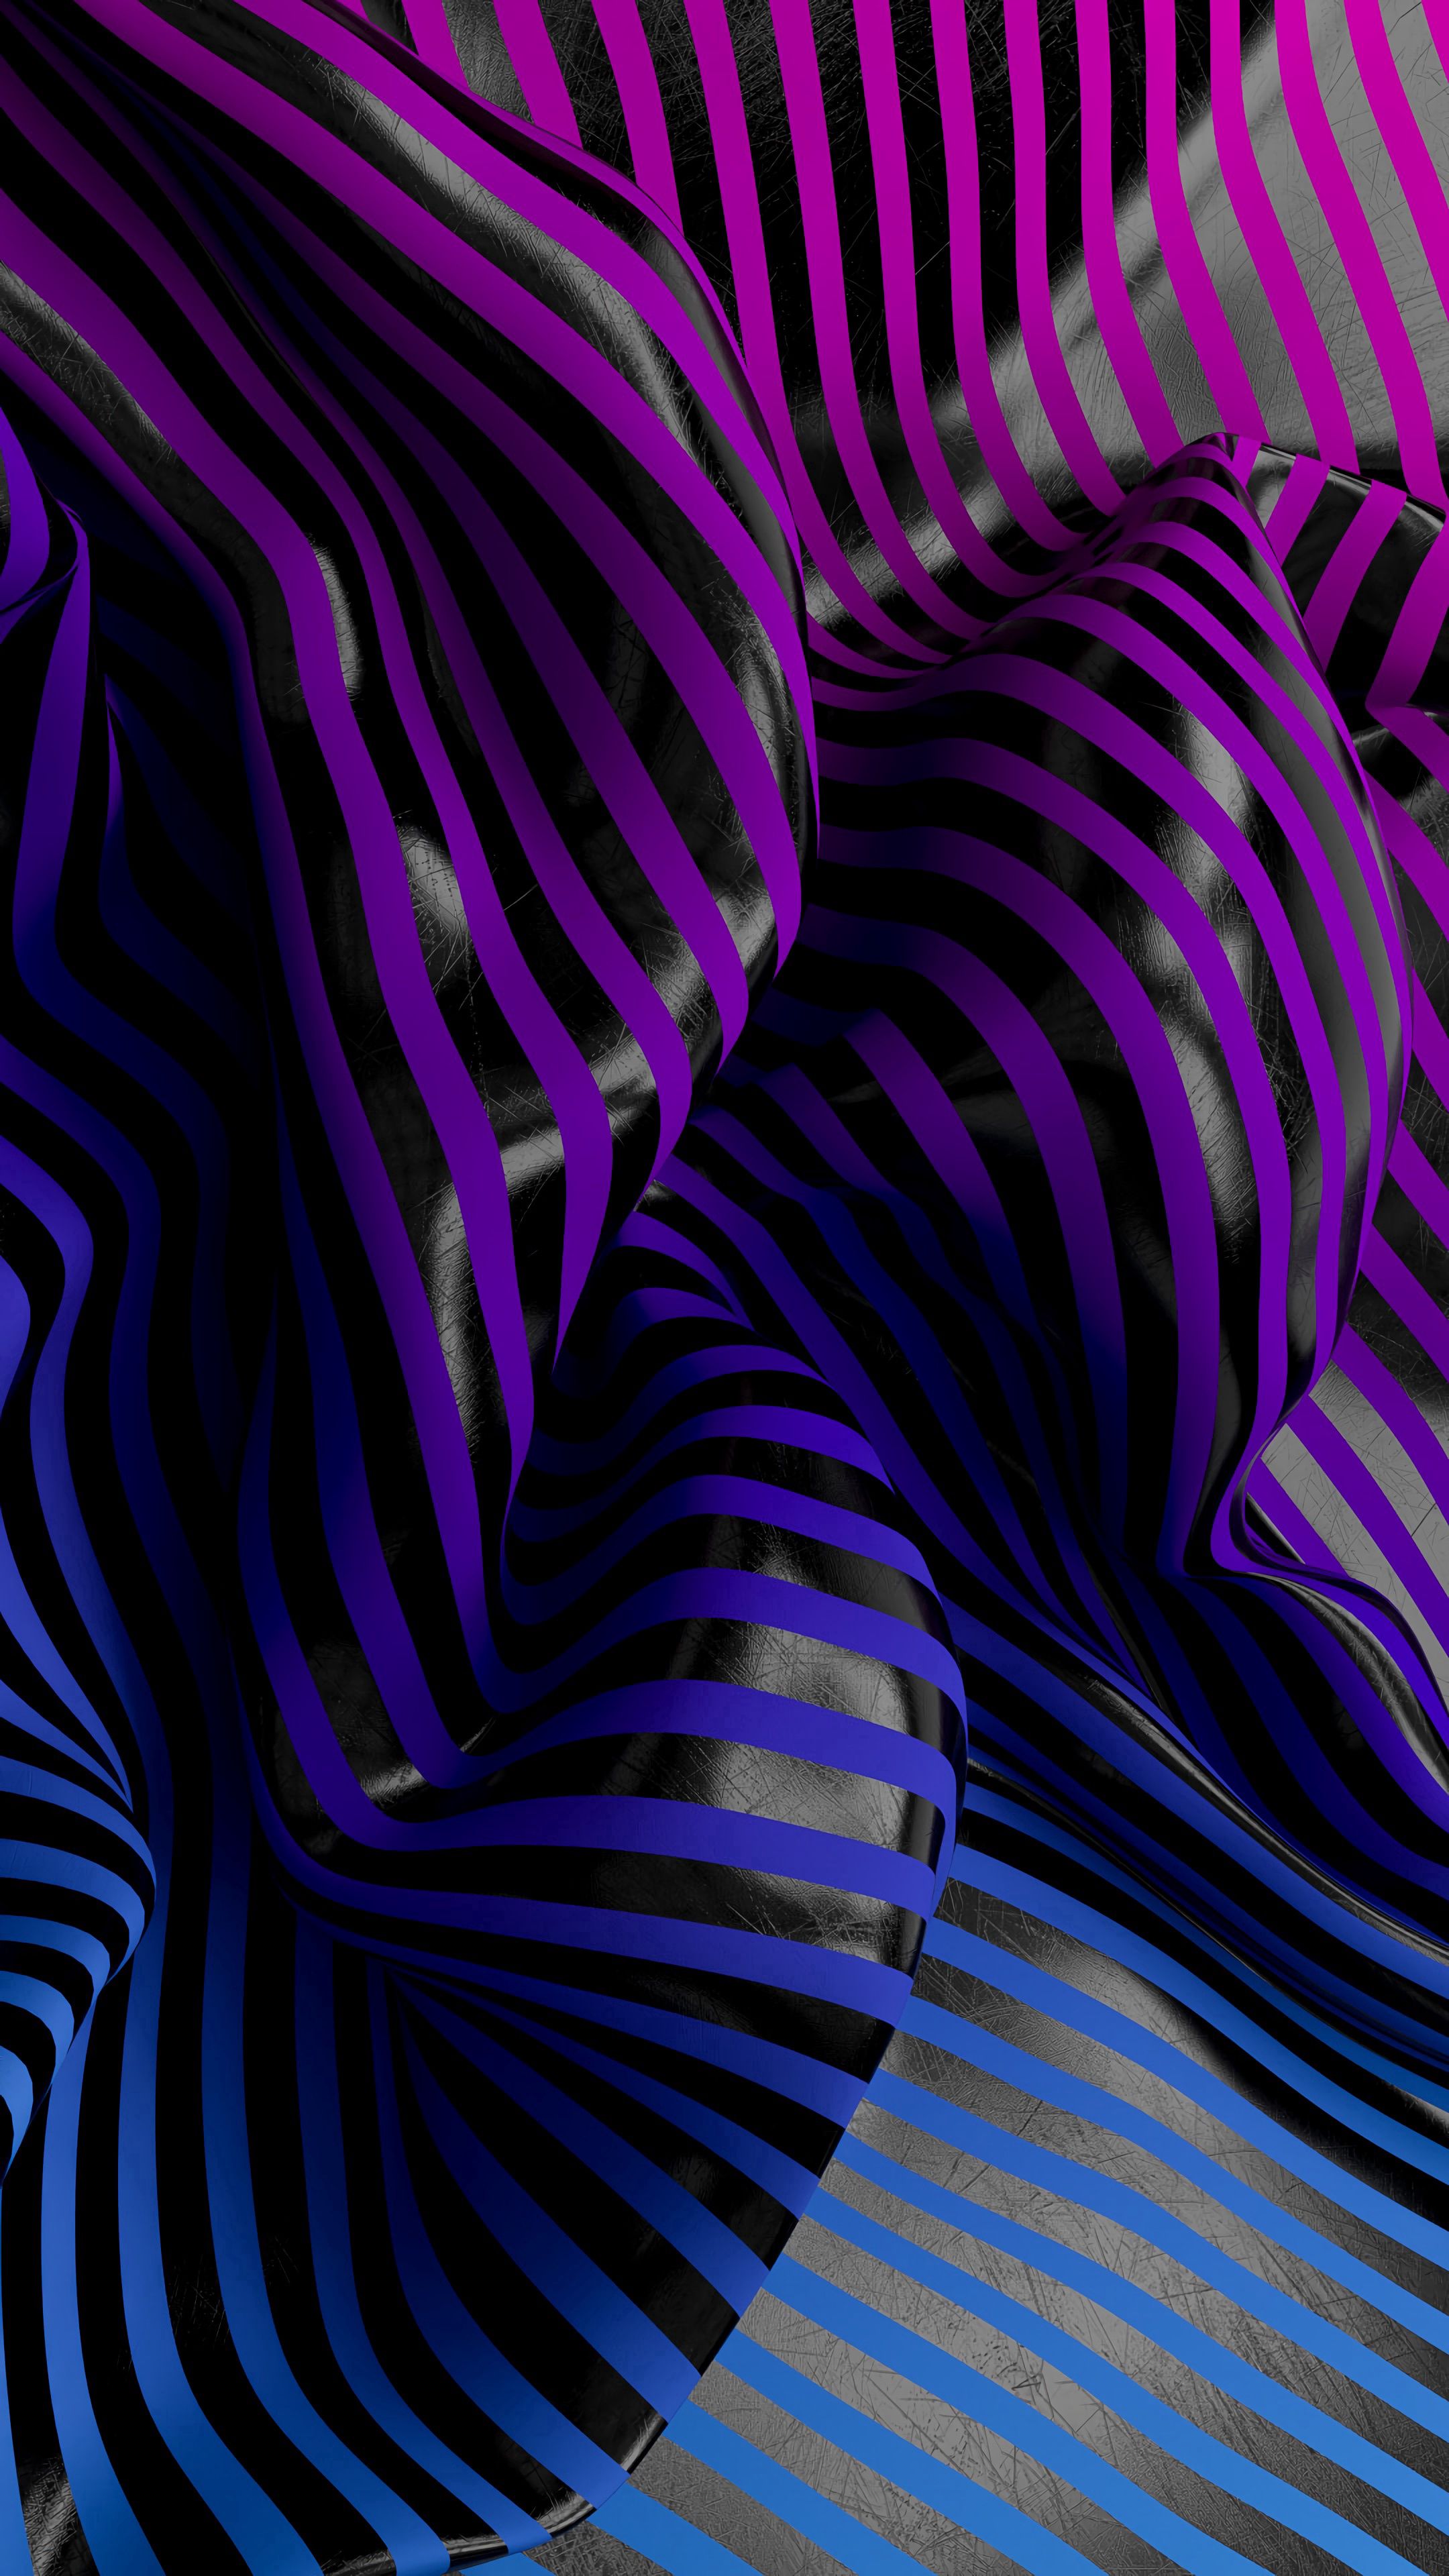 72116 2560x1080 PC pictures for free, download 3d, stripes, relief, wavy 2560x1080 wallpapers on your desktop